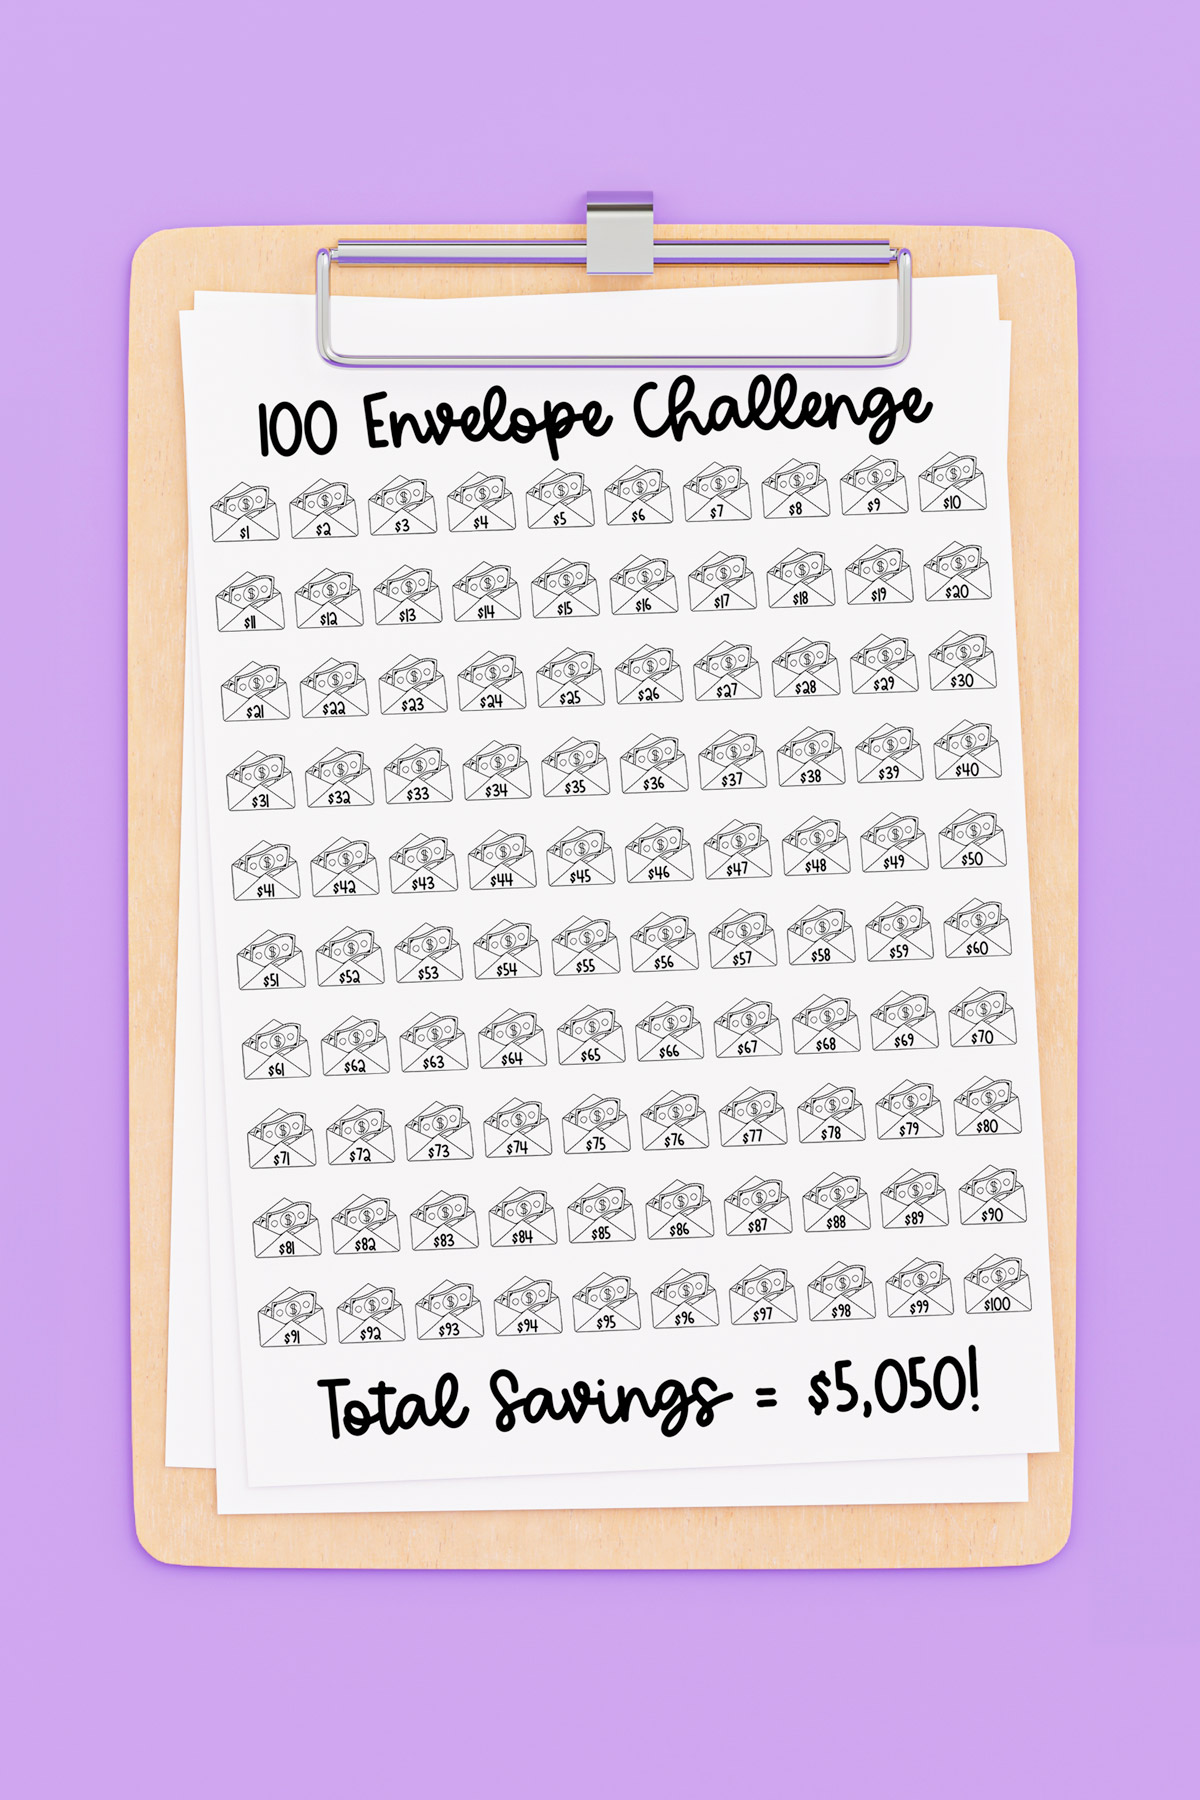 This image is showing an example of a free 100 envelope challenge chart printable you can get at the end of this post. This one is for saving $5,050.